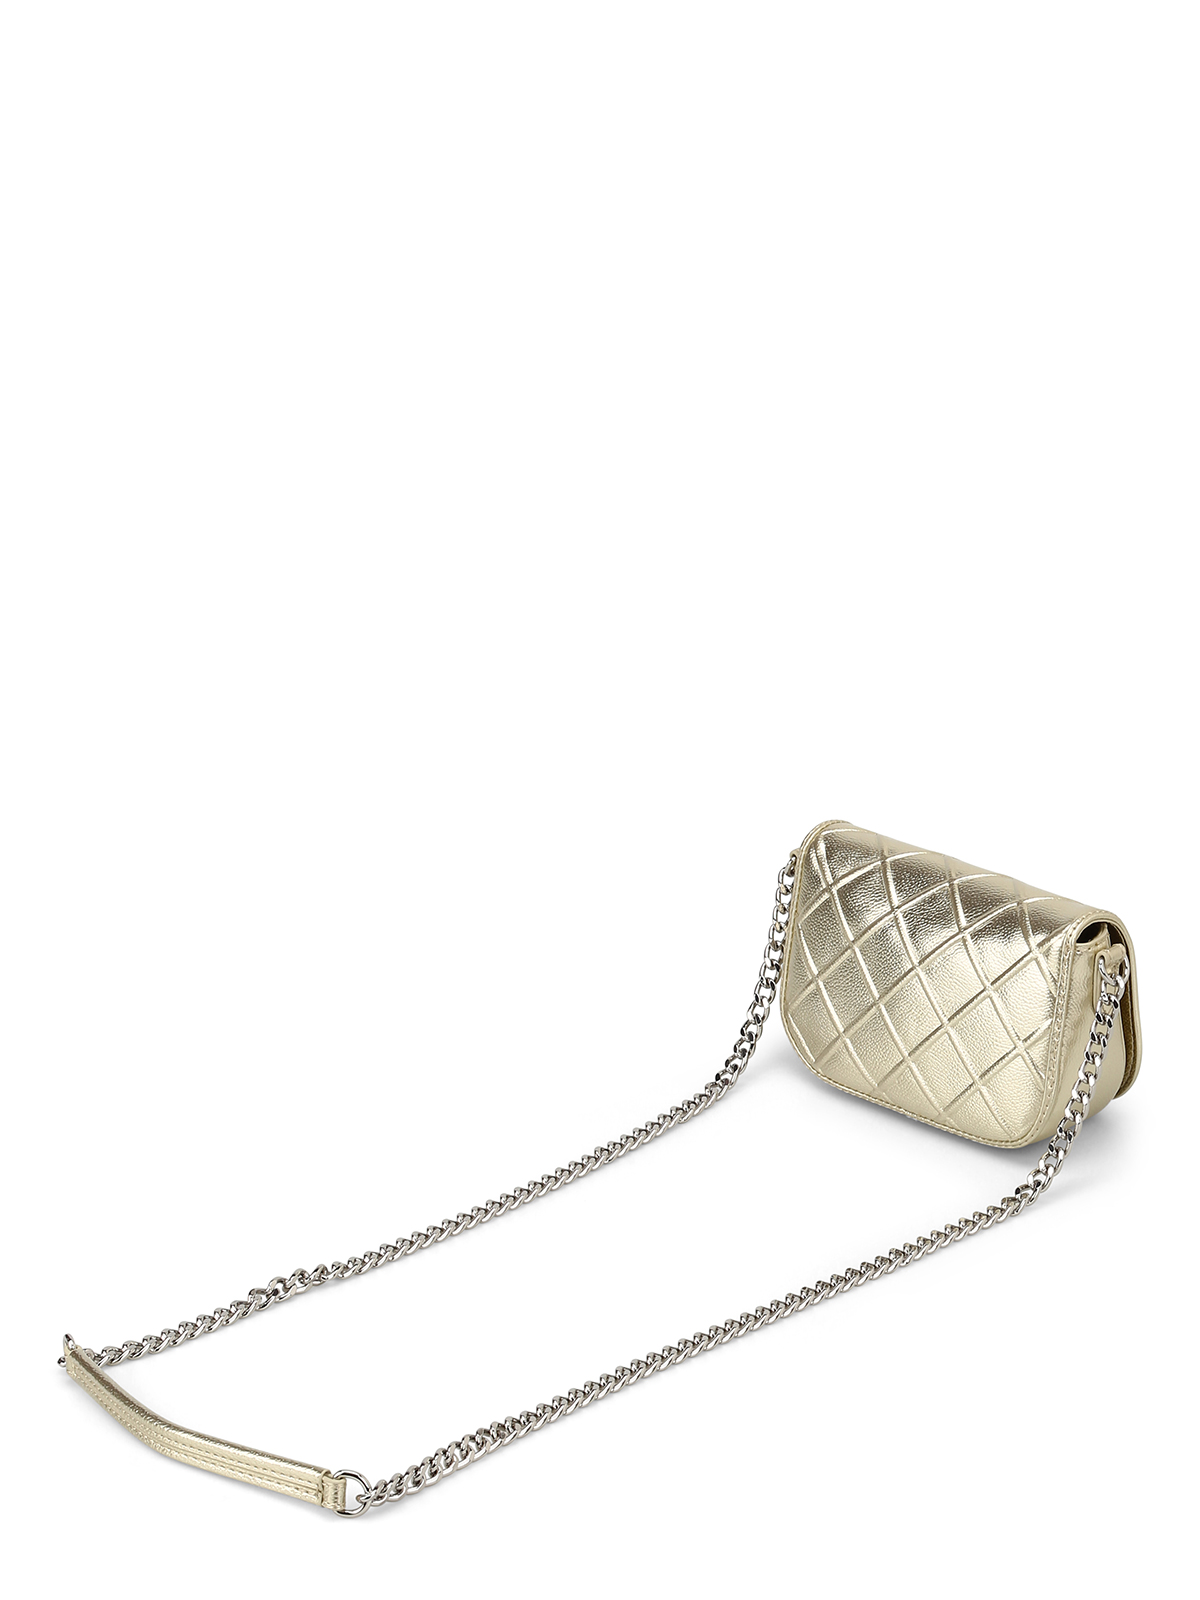 Gold Metallic Quilted Chain Cross Body Bag